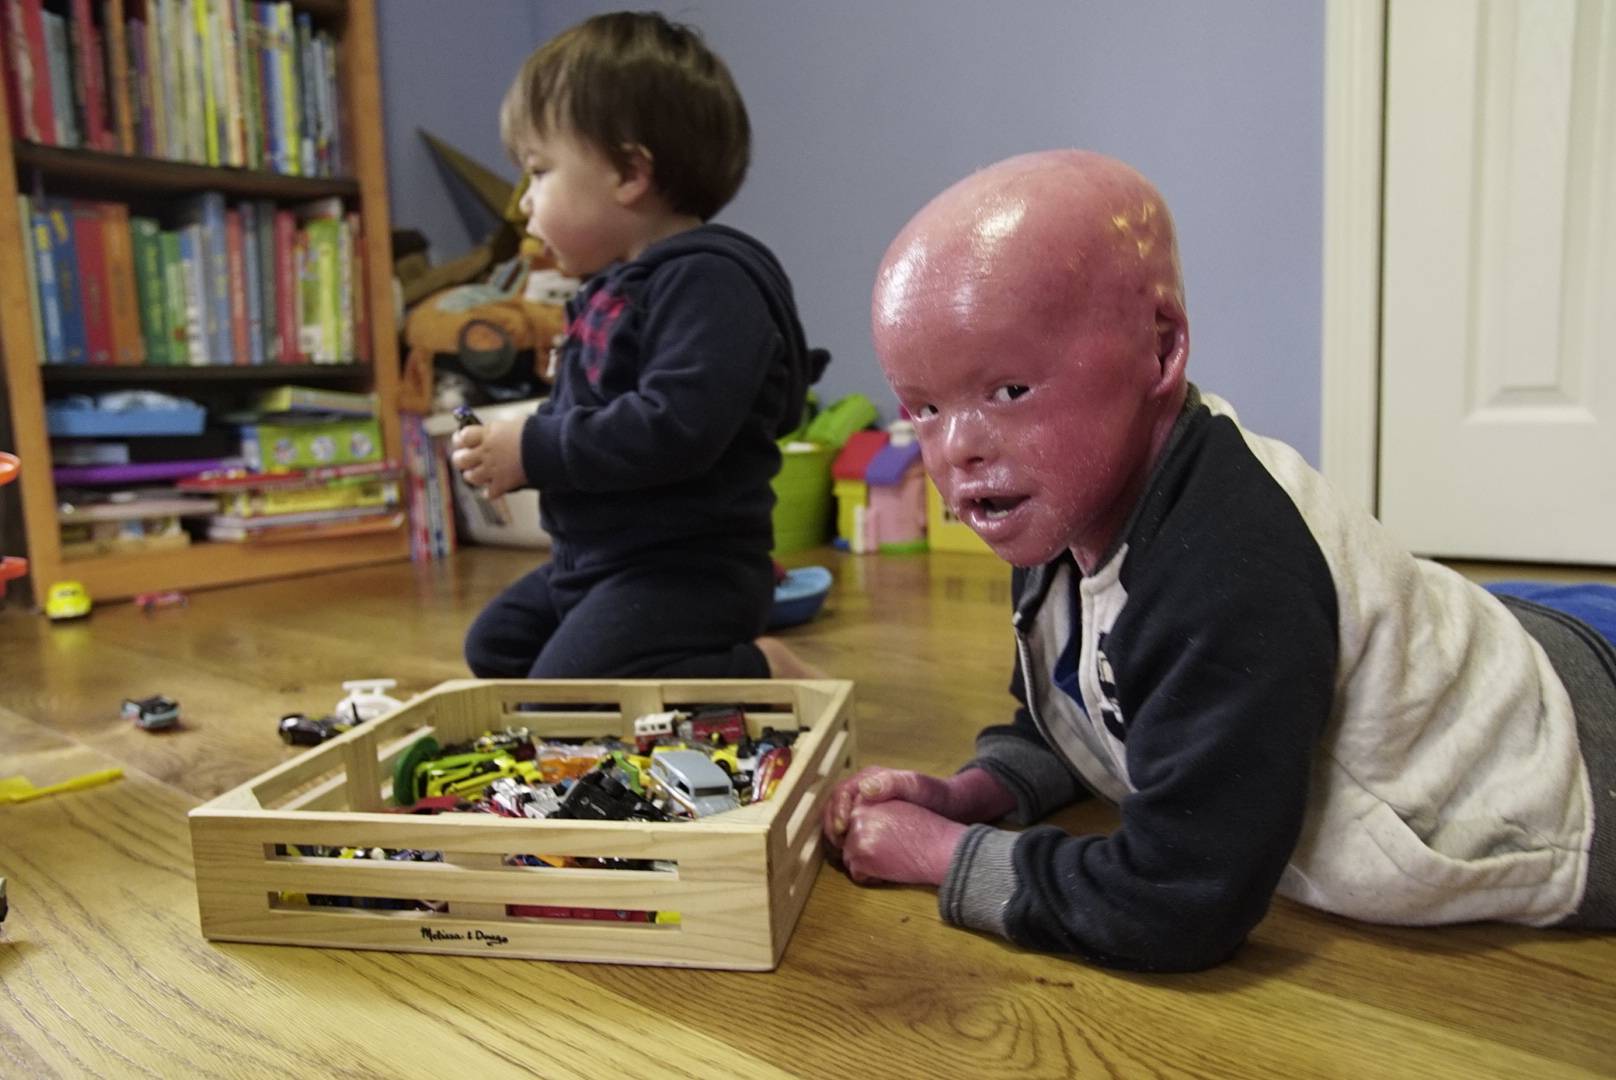 Harlequin Ichthyosis: The Boy Whose Skin Grows Too Fast